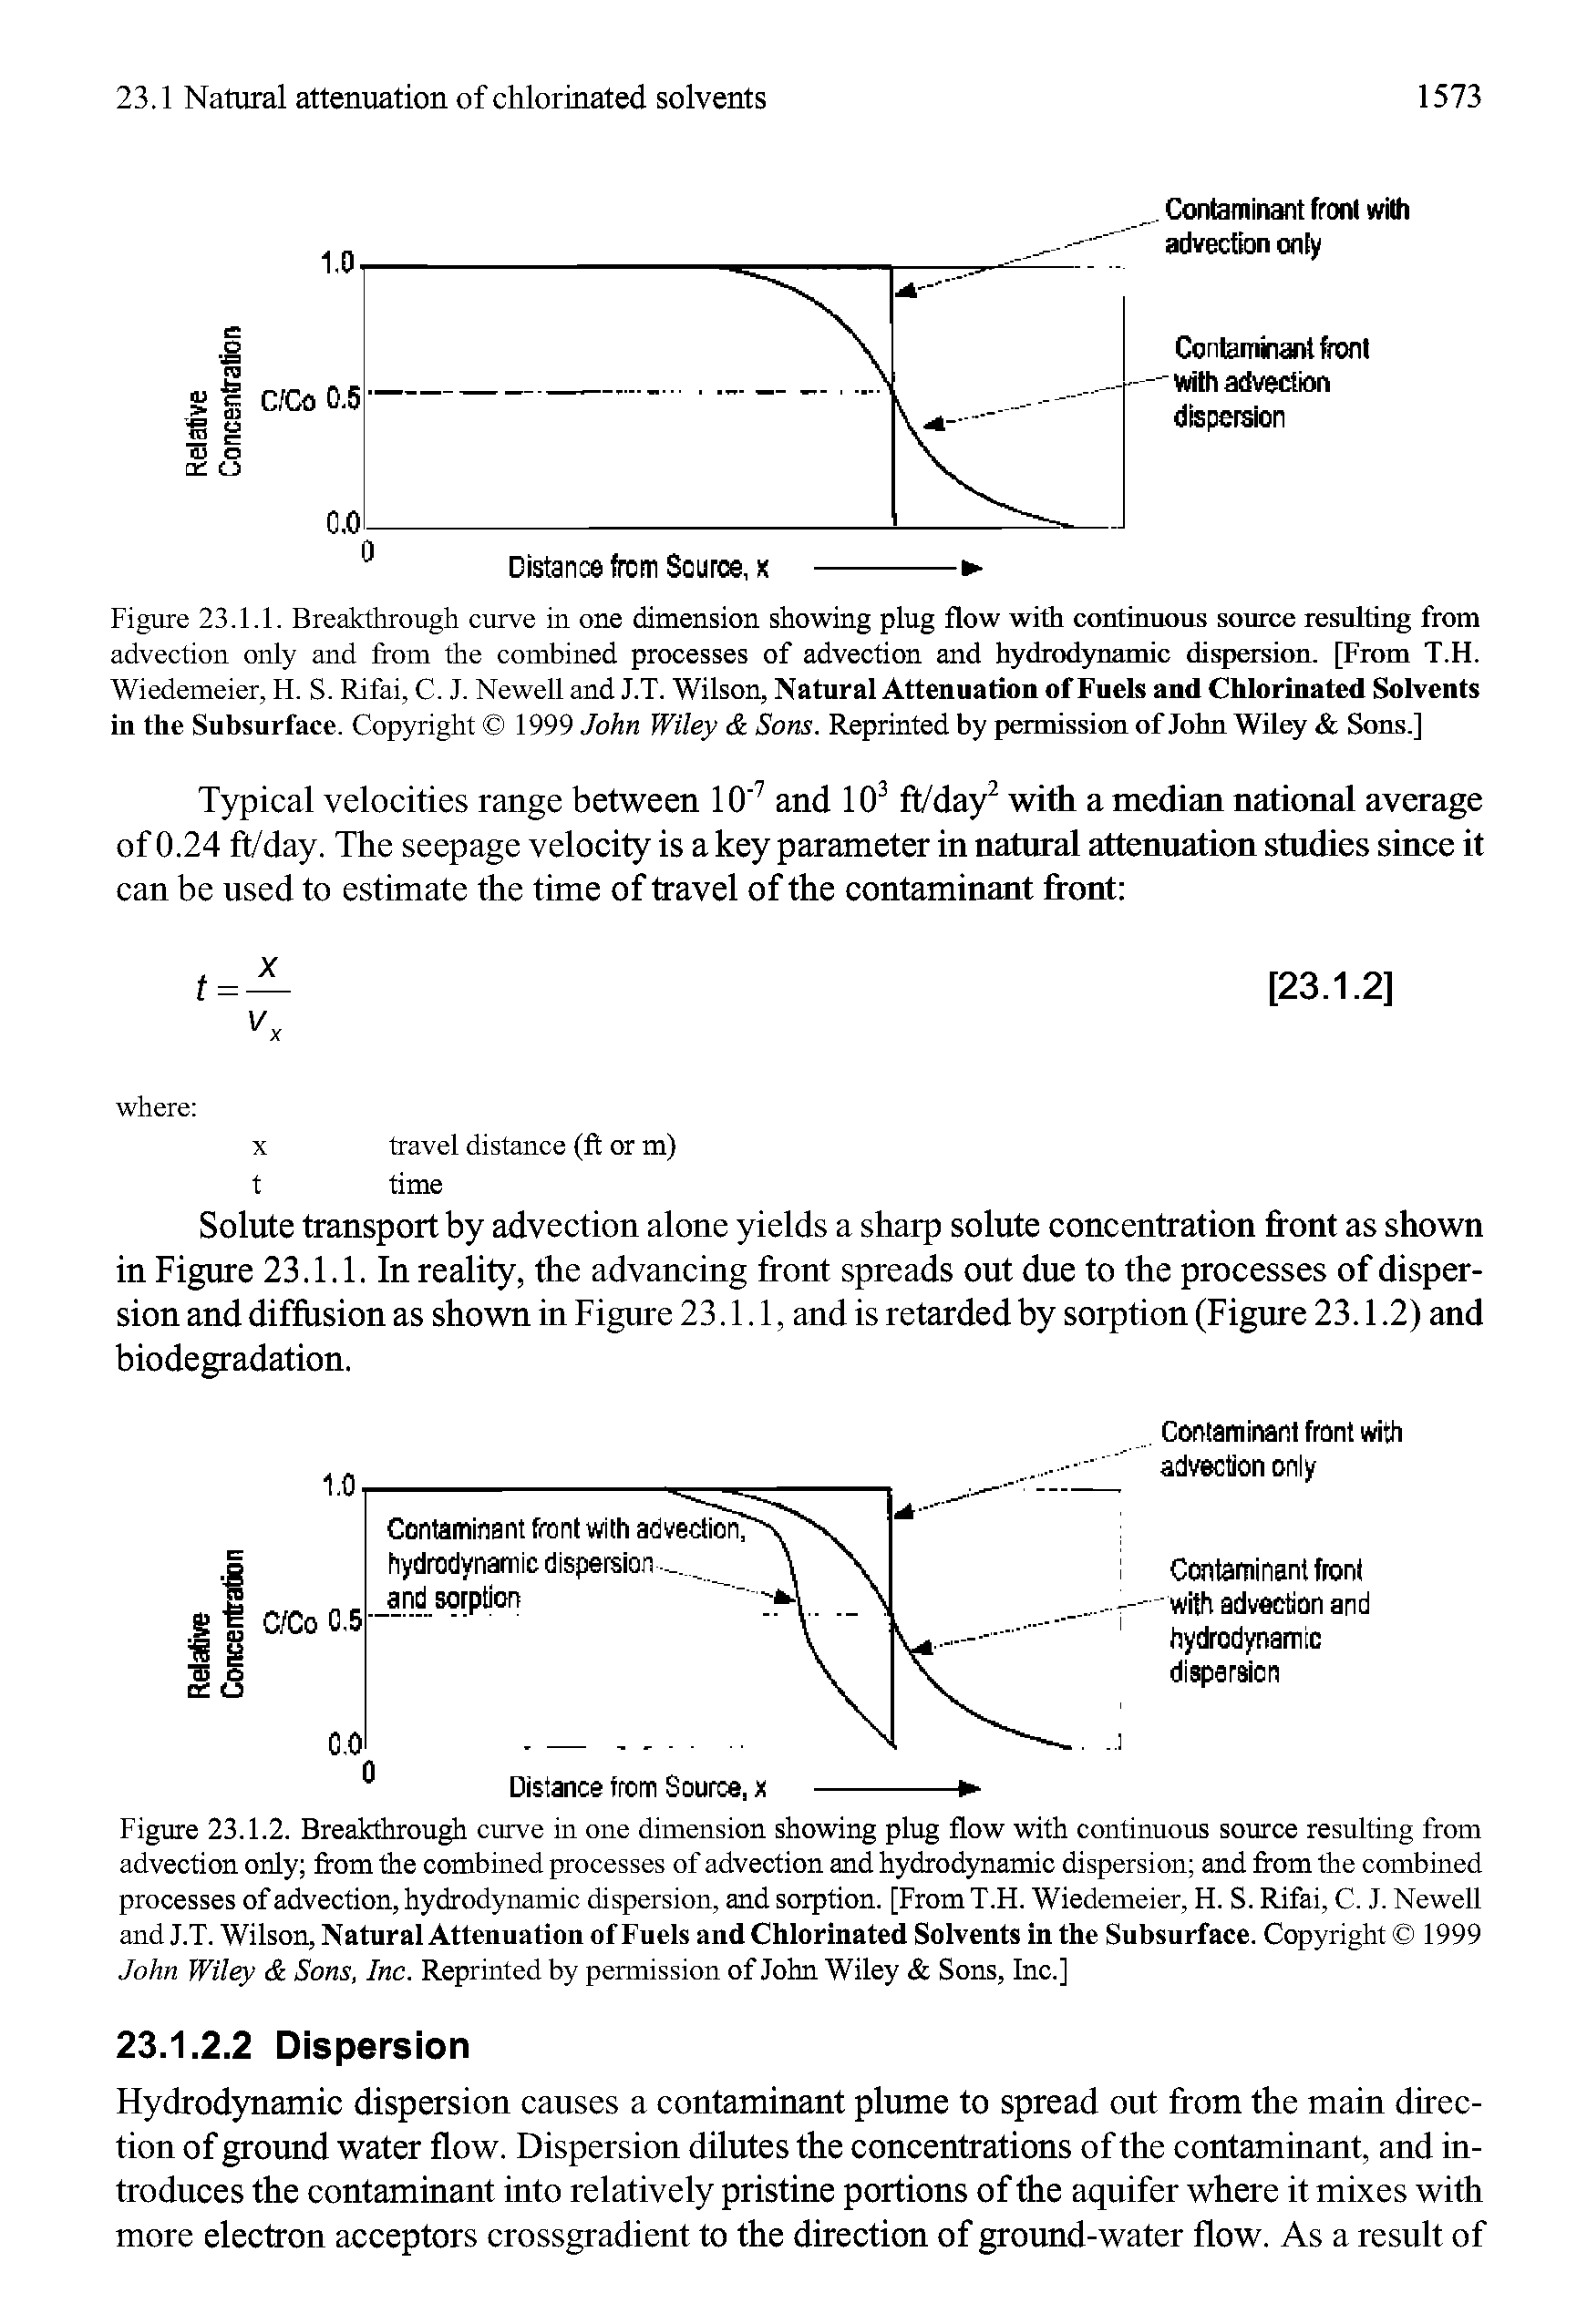 Figure 23.1.1. Breakthrough curve in one dimension showing plug flow with continuous source resulting from advection only and from the combined processes of advection and hydrodynamic dispersion. [From T.H. Wiedemeier, H. S. Rifai, C. J. Newell and J.T. Wilson, Natural Attenuation of Fuels and Chlorinated Solvents in the Subsurface. Copyright 1999 John Wiley Sons. Reprinted by permission of John Wiley Sons.]...